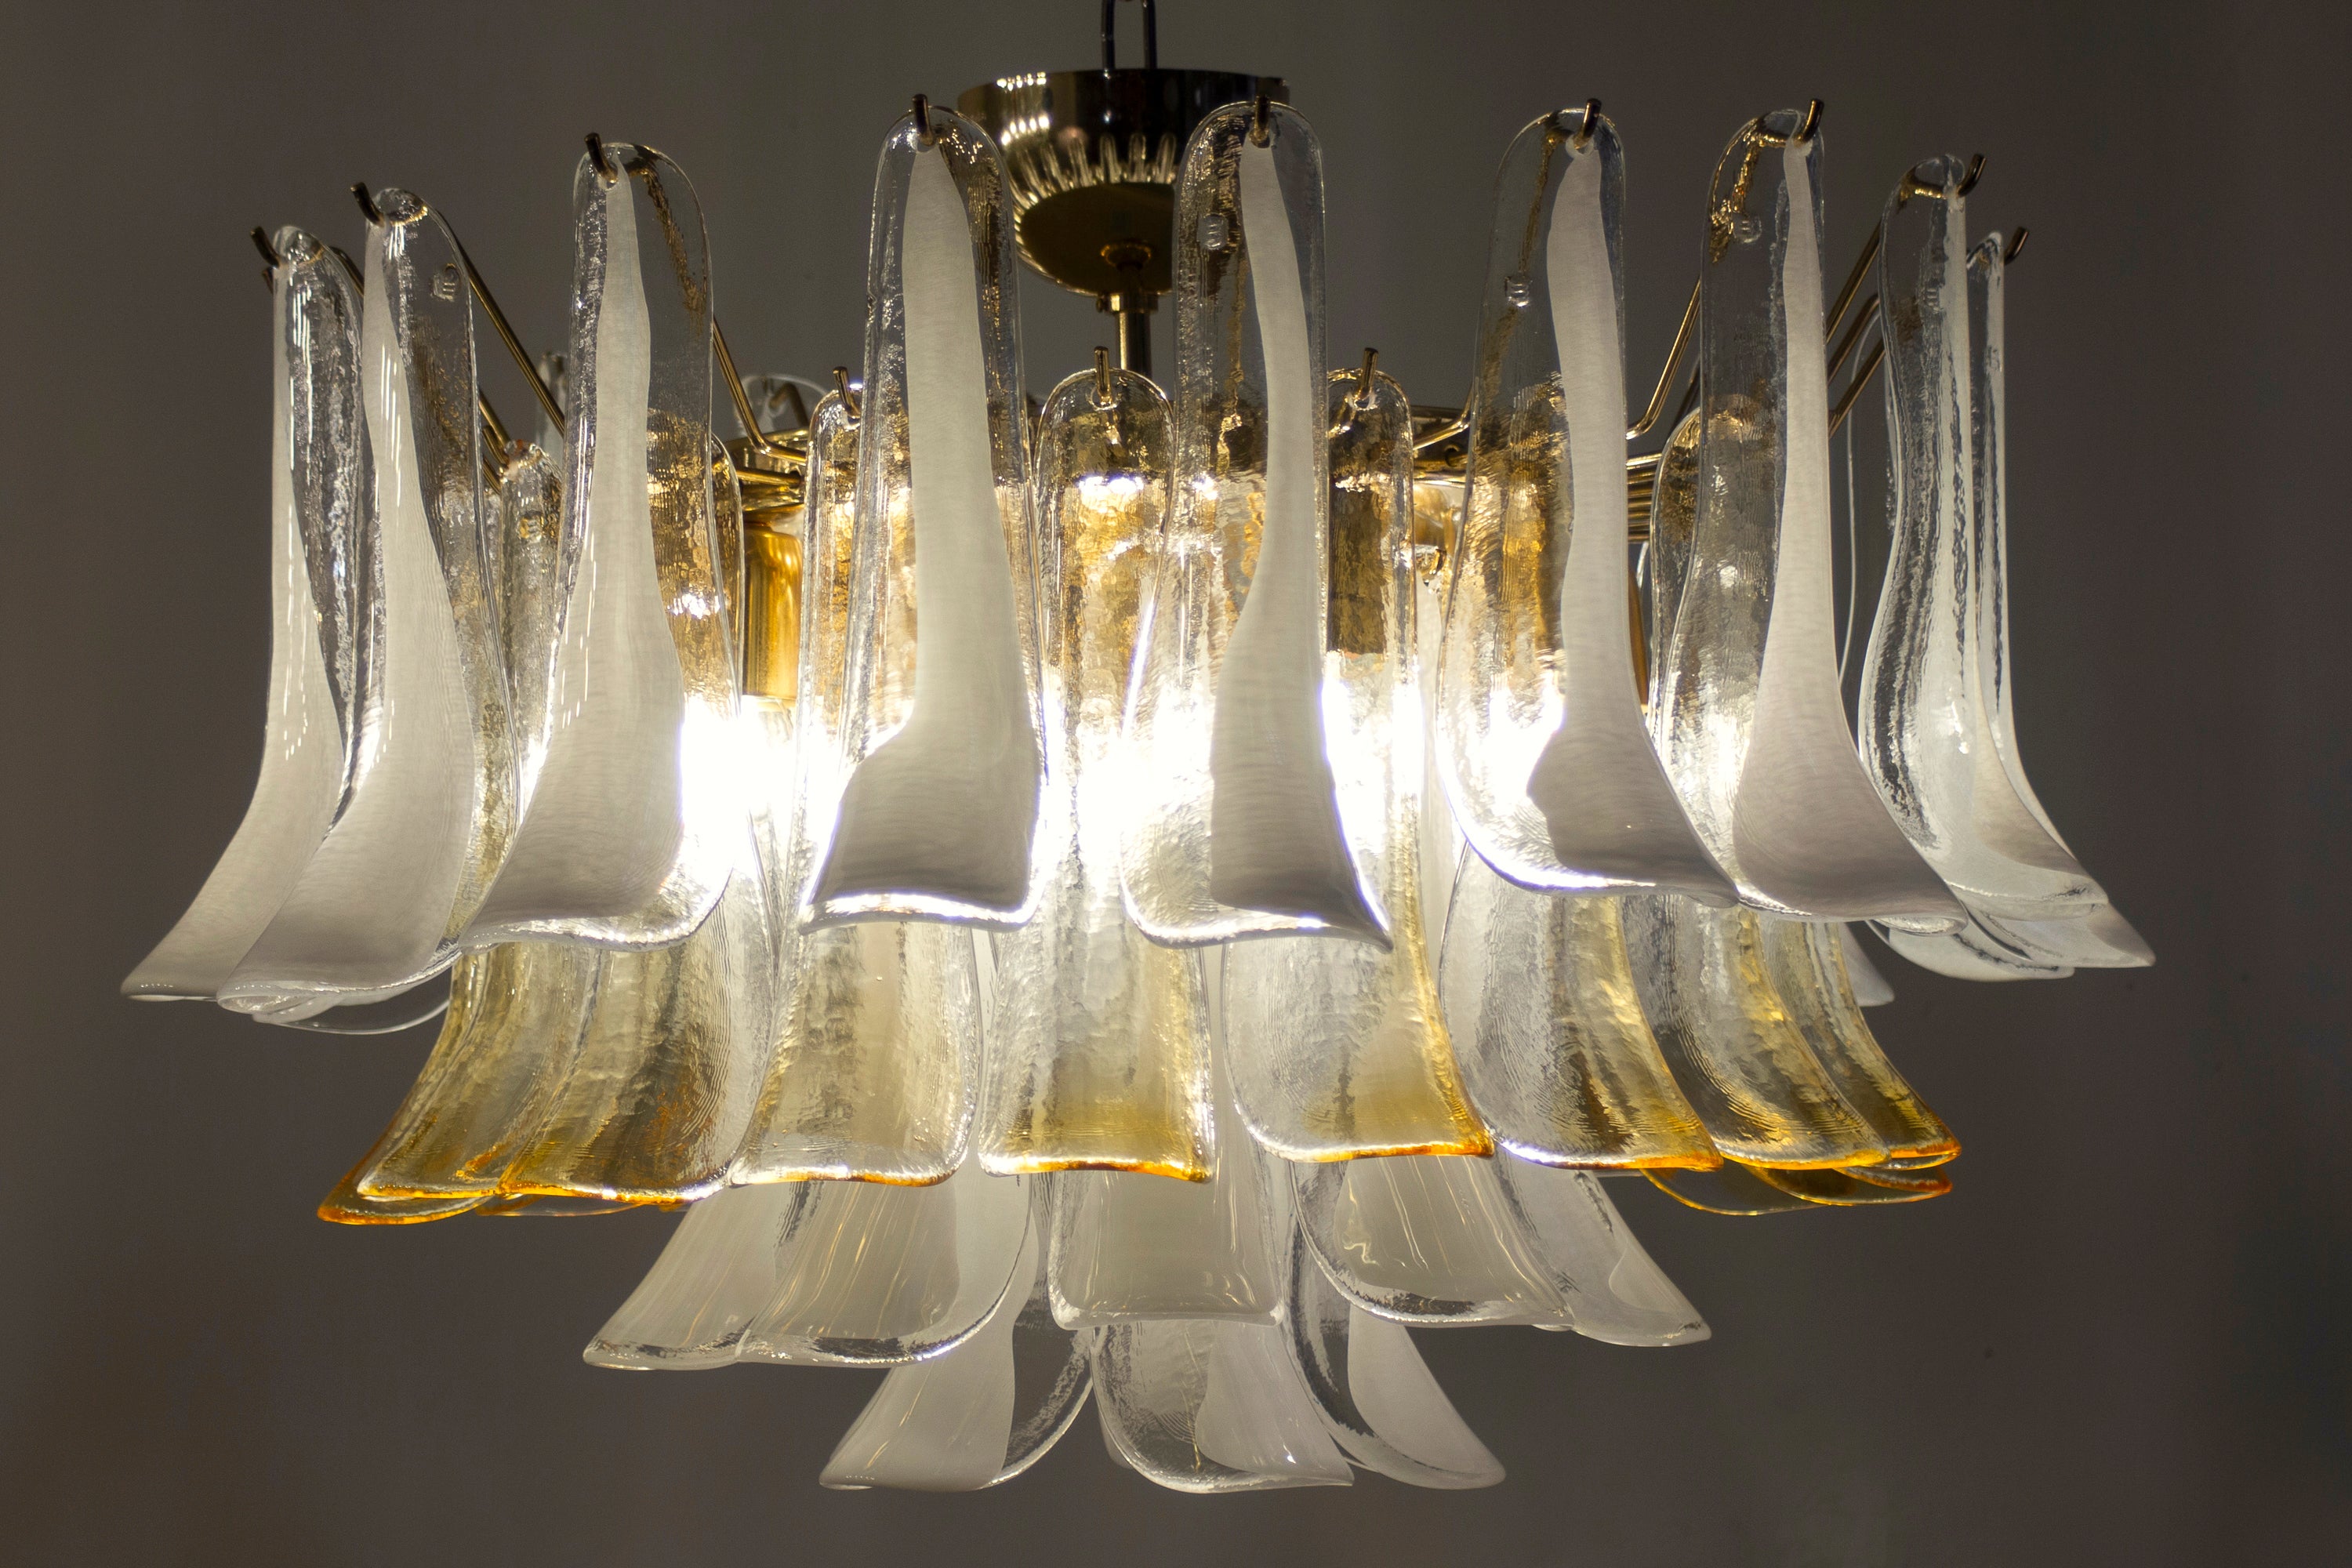 Amazing chandelier with white and amber petals hand blown glasses by Murrina. Italy 1970'
Measures: height ; cm 60 diameter cm 65 (25.6 in.)
10  E27 light bulbs.
Cleaned and re-wired, in full working order and ready to use. In excellent vintage